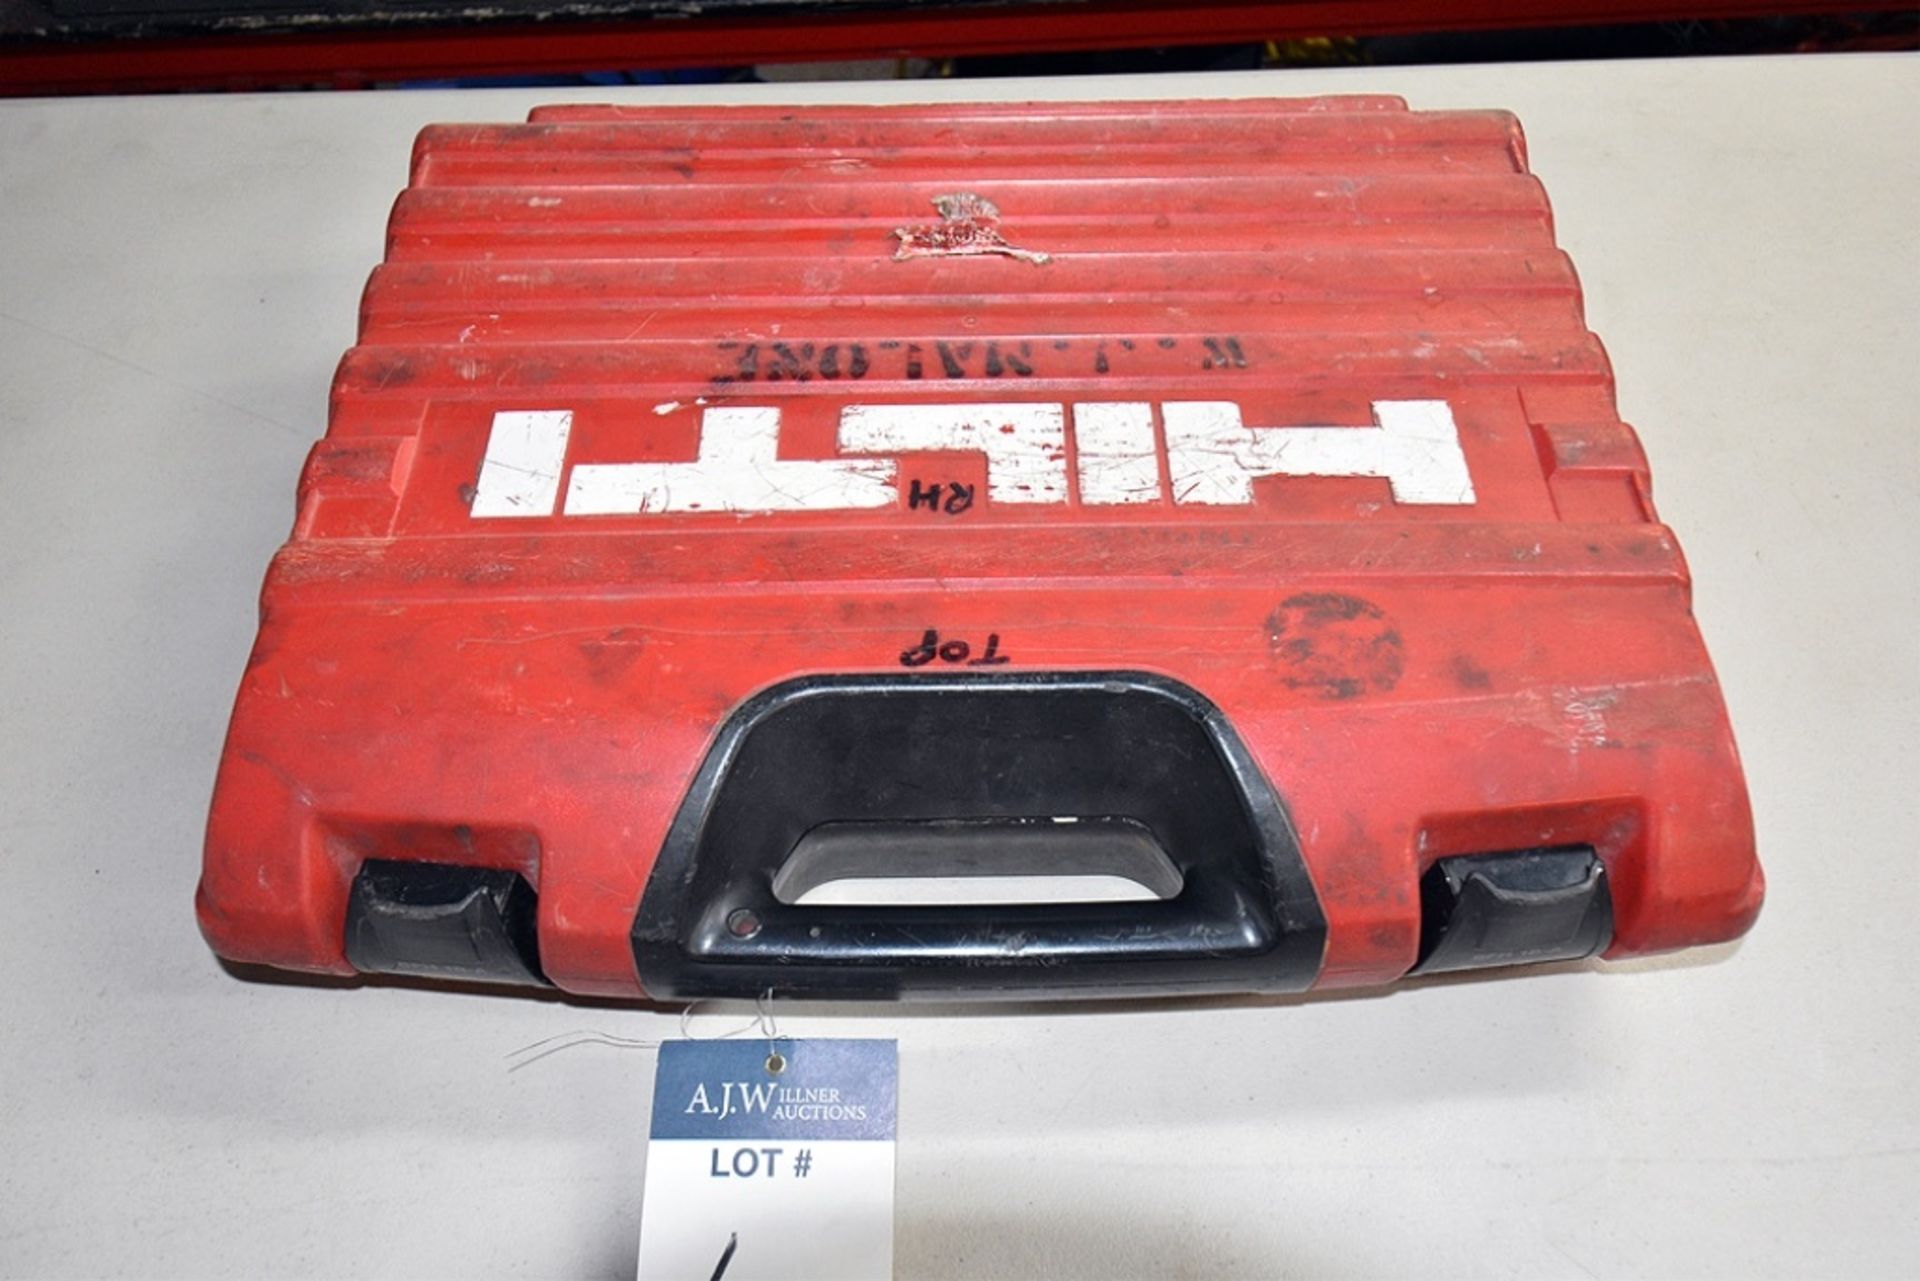 Hilti SFH18-A Cordless Driver w/ (2) 18v Lithium Ion 3.3Ah Battery w/ Charger and Case - Image 3 of 3